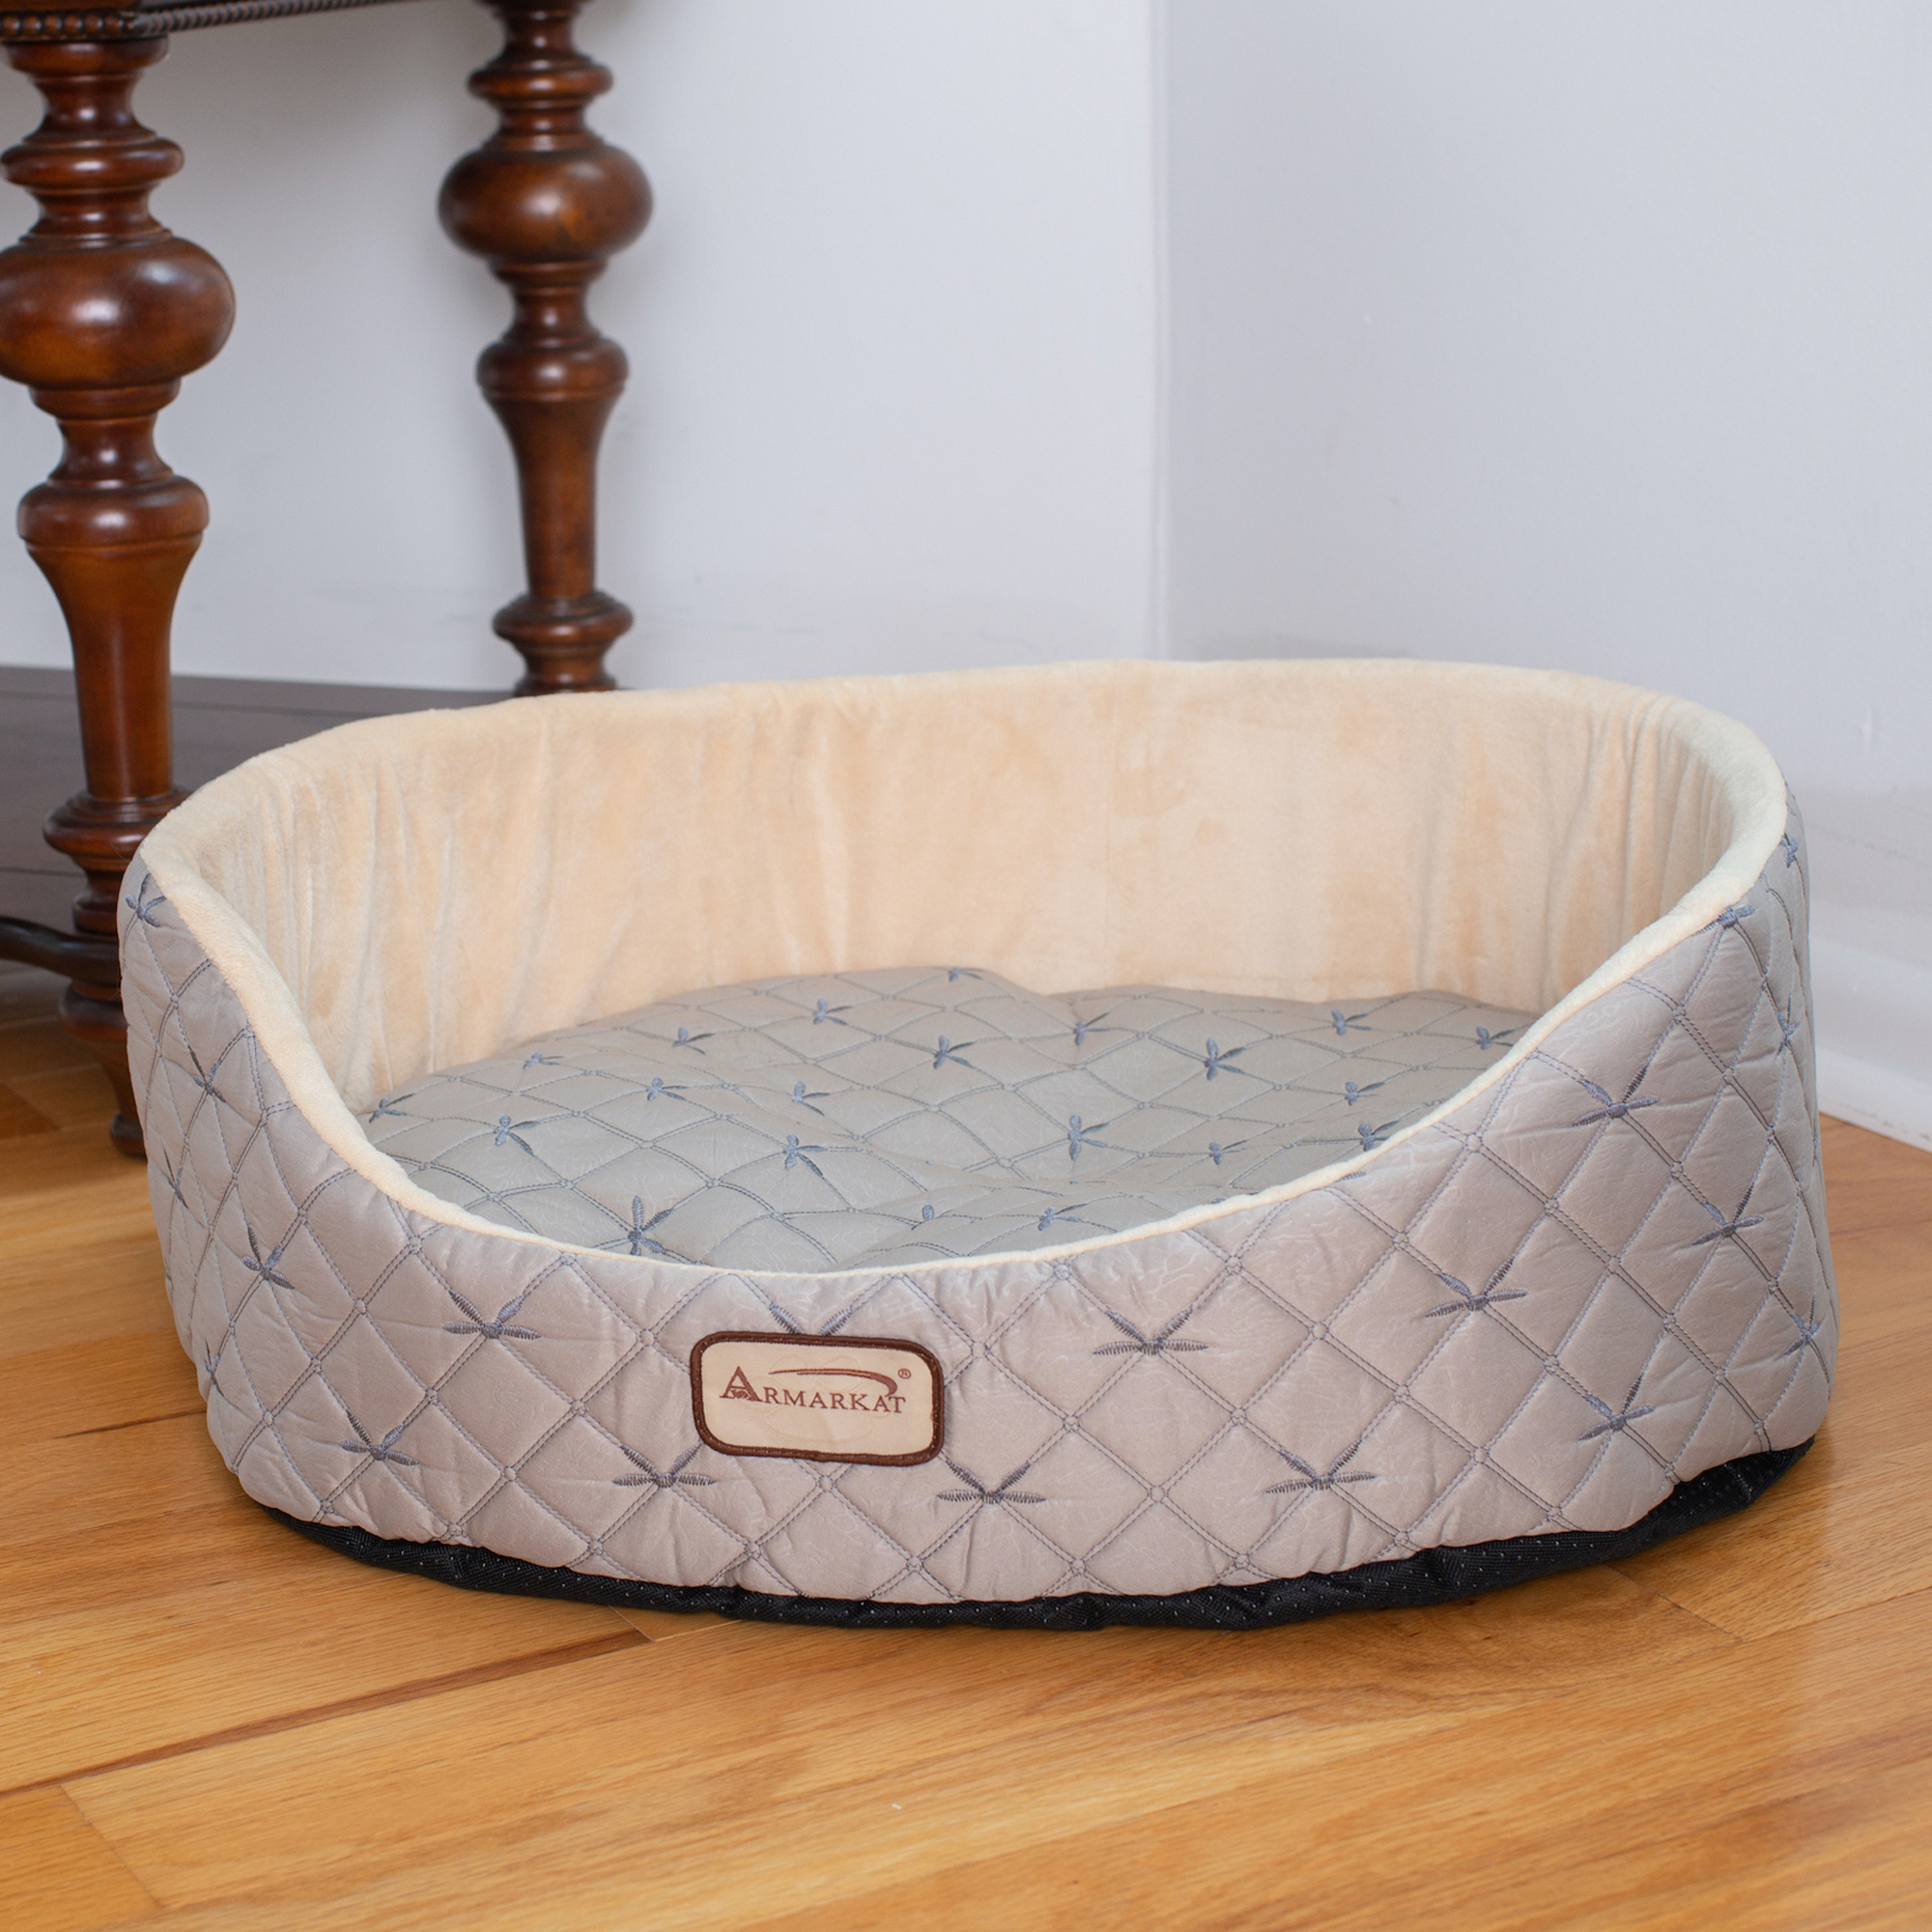 C35hqh-mh Armarkat Cat Bed, Pale Silver And Beige C35hqh-mh